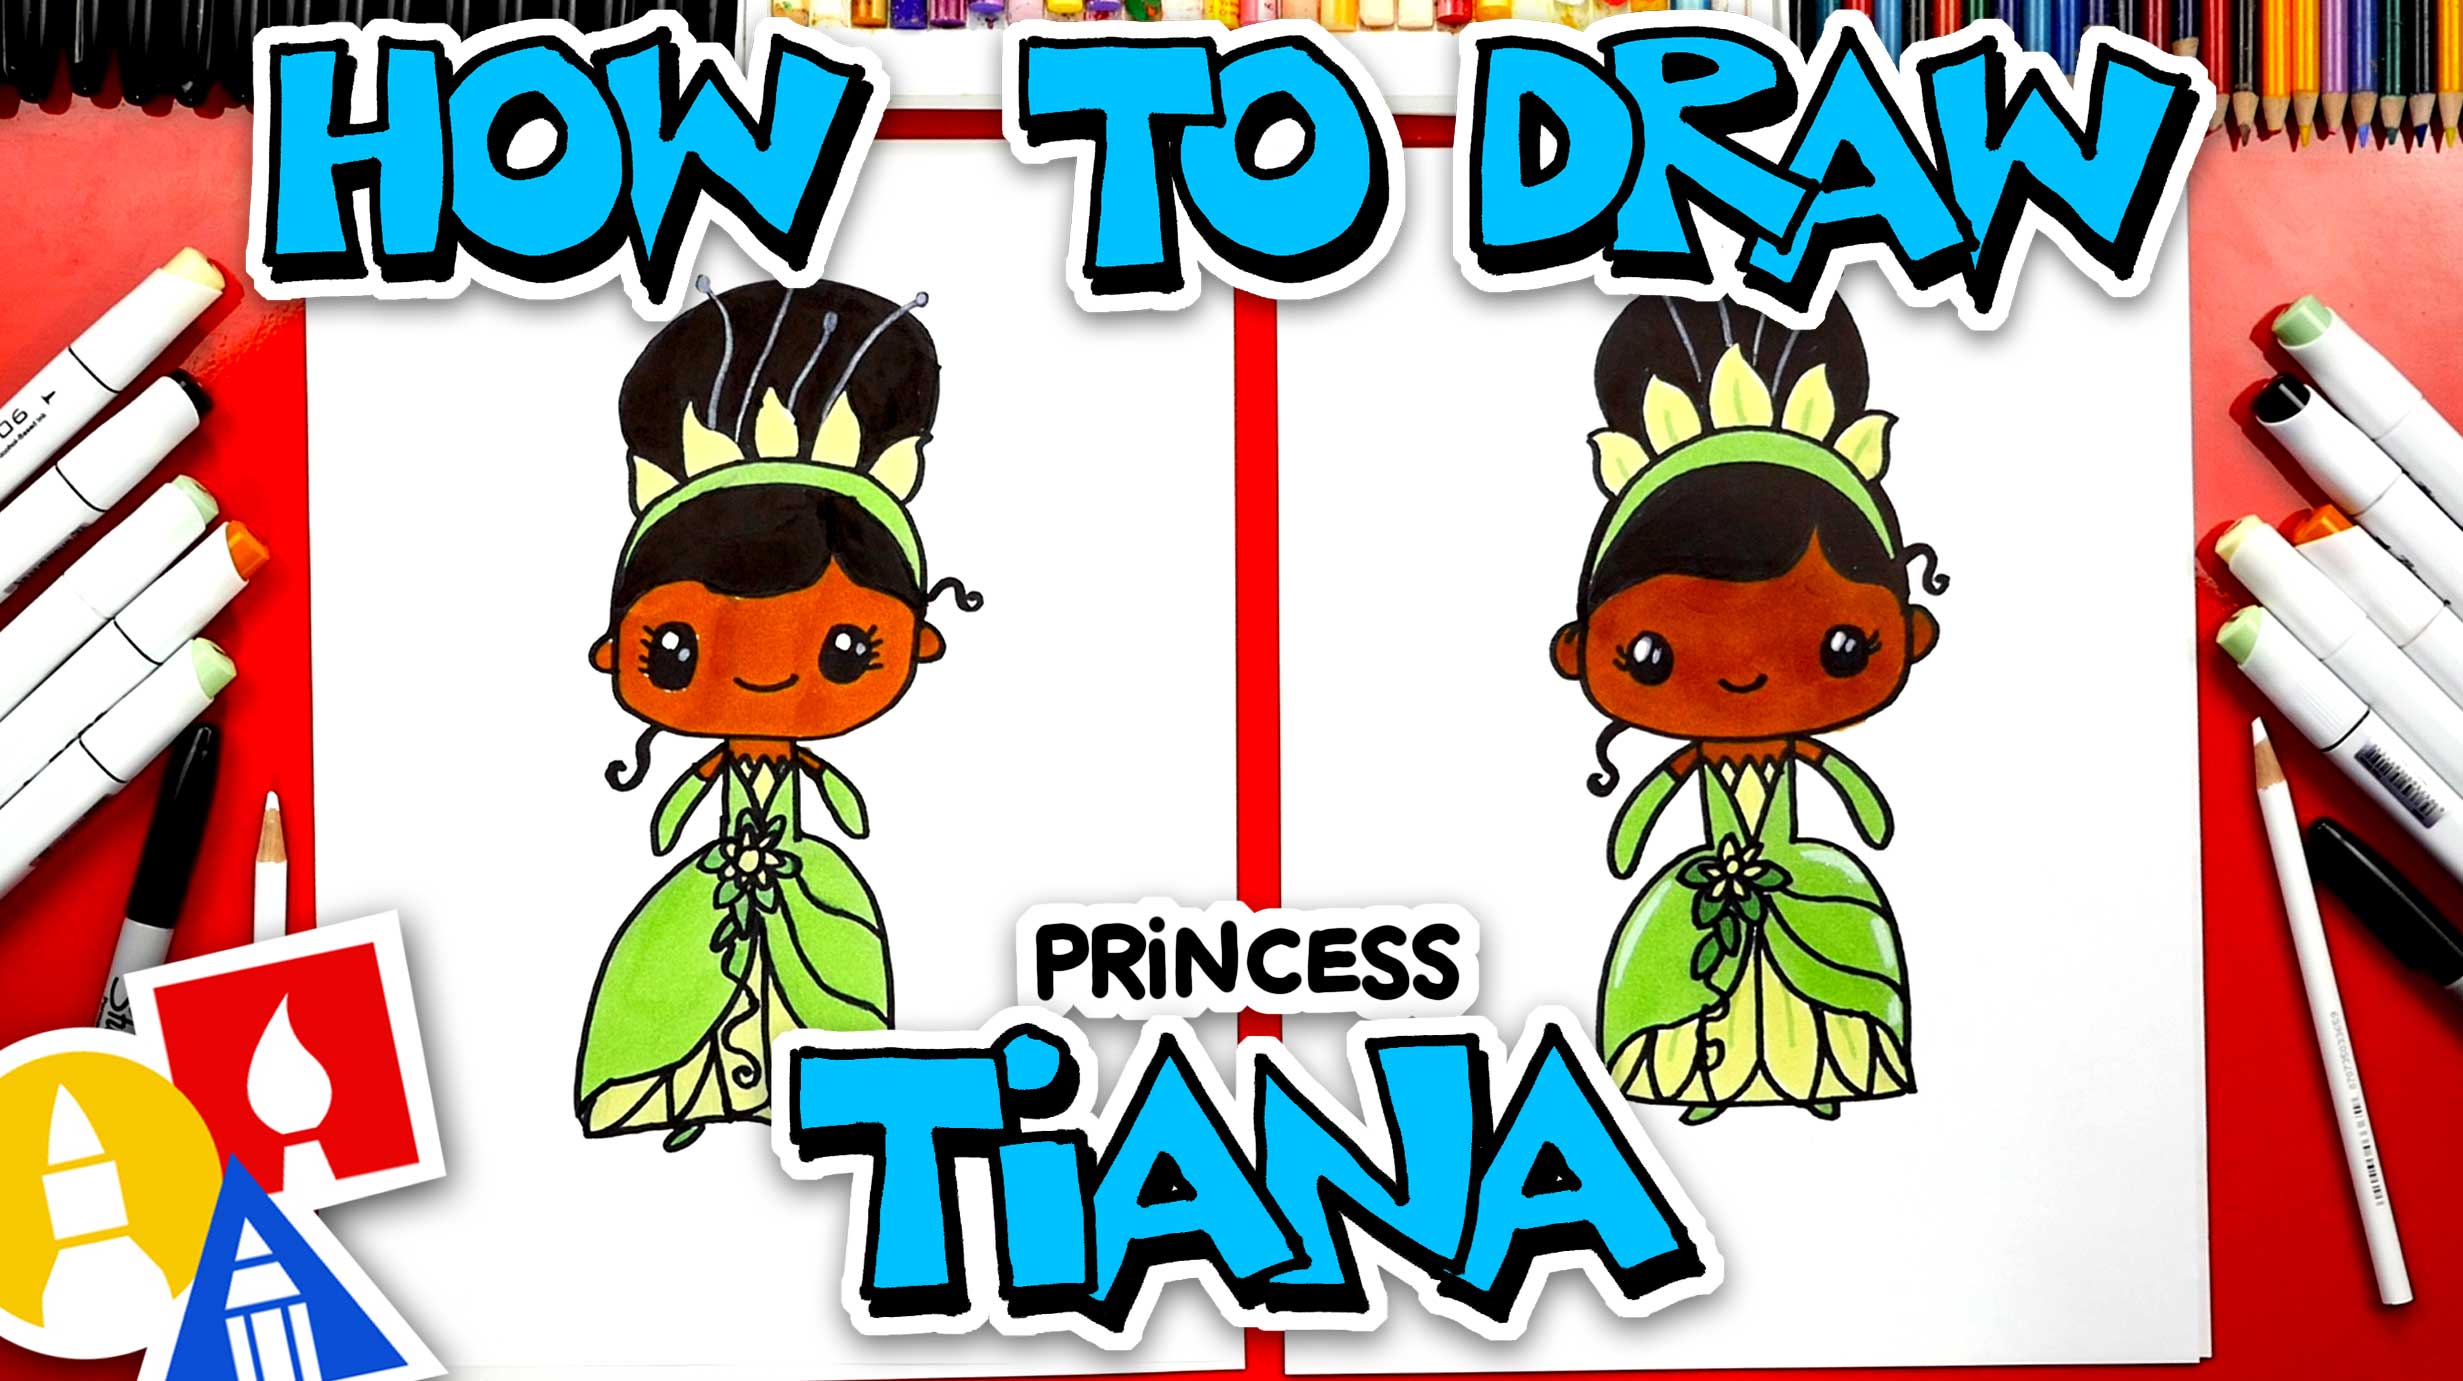 How To Draw Princess Tiana From Princess And The Frog Art For Kids Hub